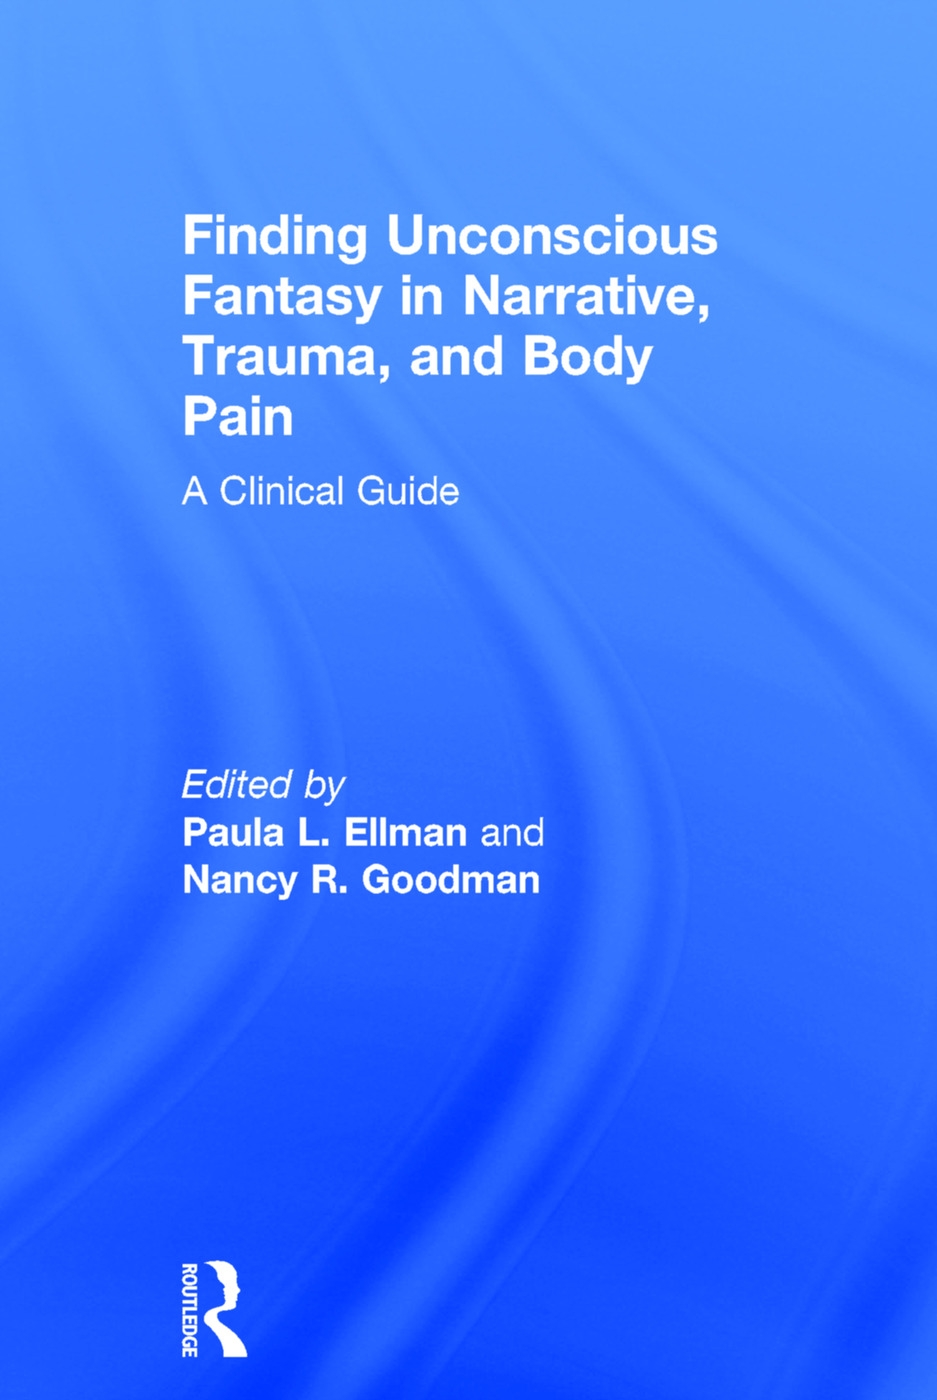 Finding Unconscious Fantasy in Narrative, Trauma, and Body Pain: A Clinical Guide